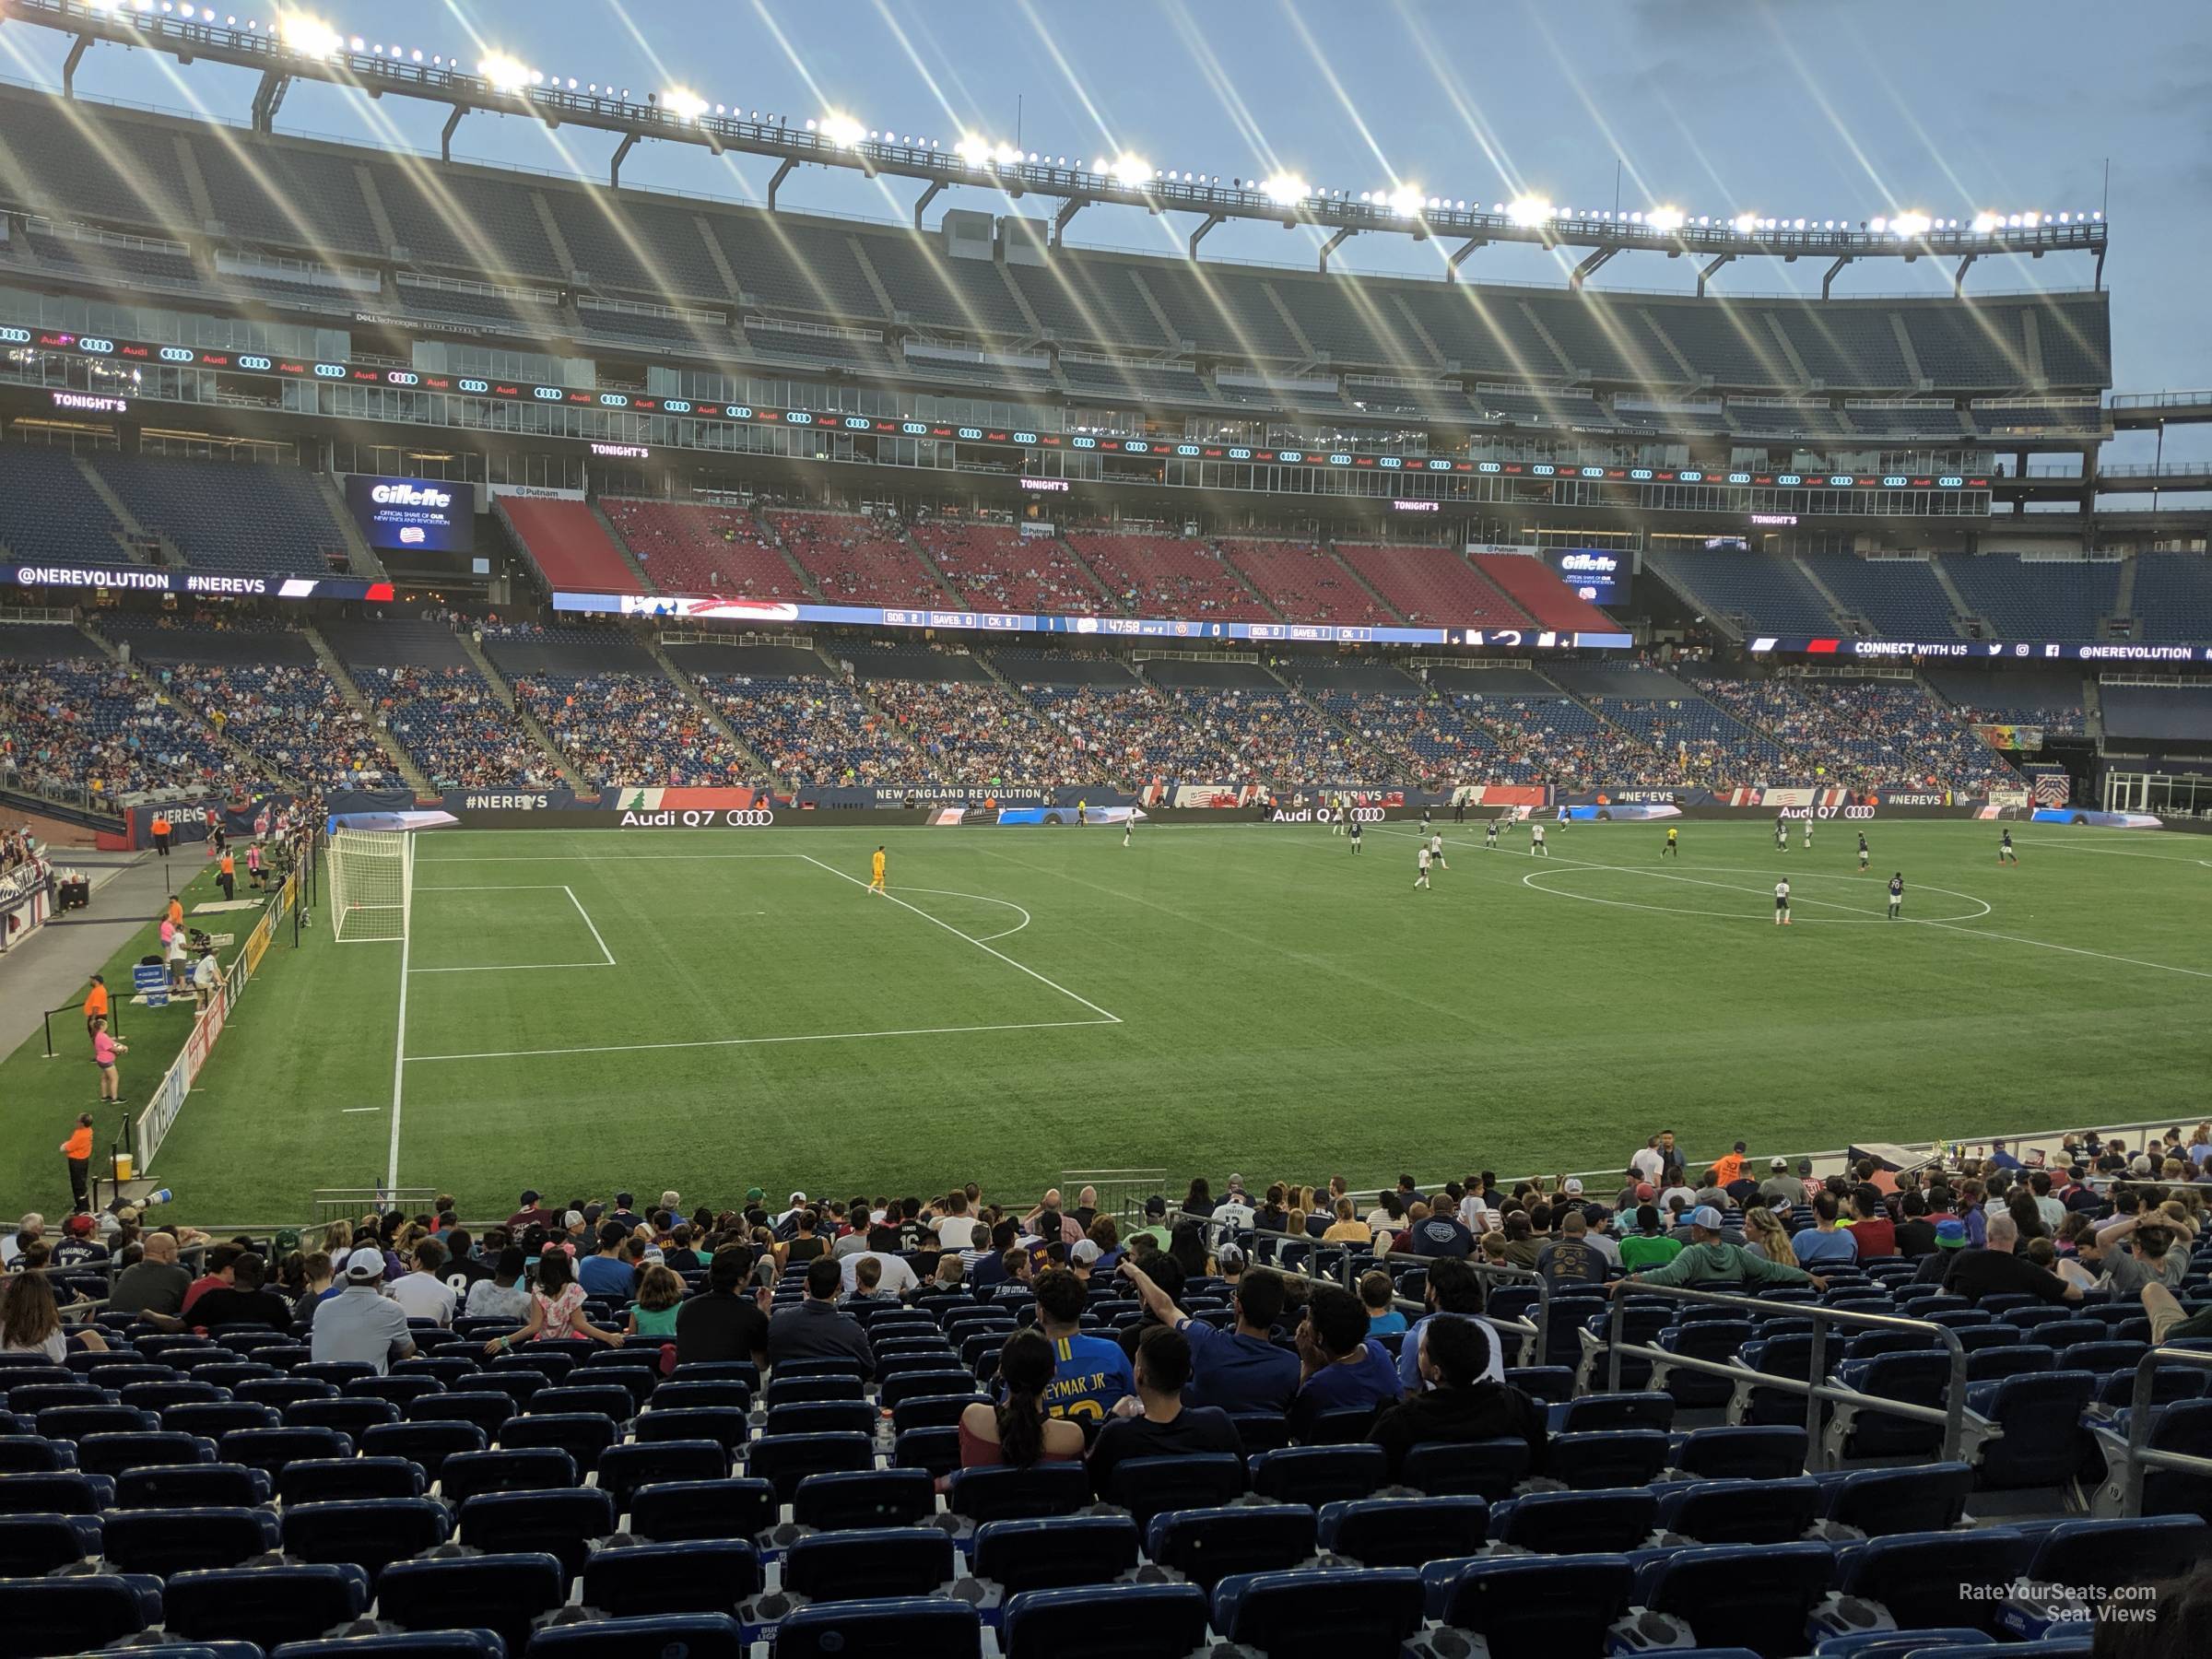 section 136, row 25 seat view  for soccer - gillette stadium